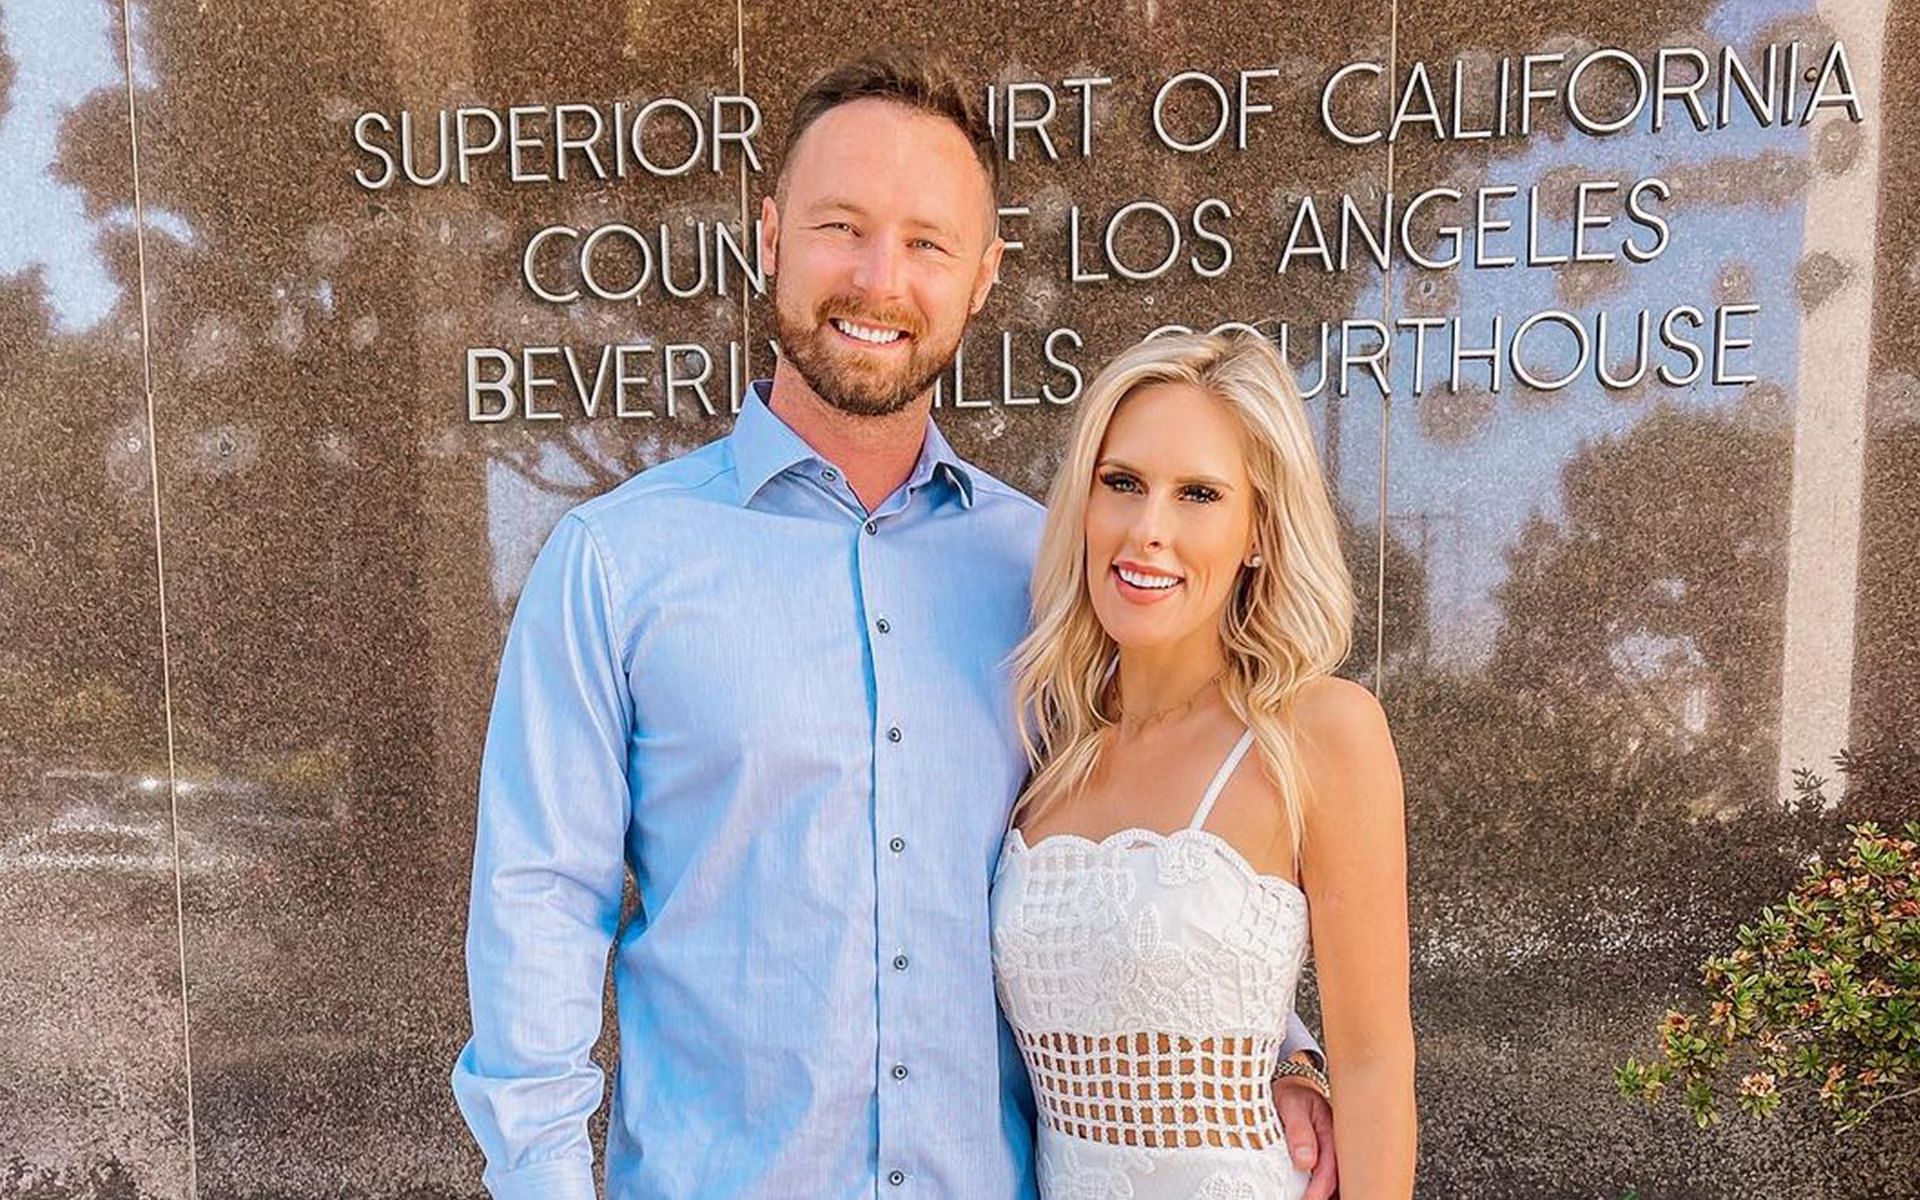 Alexis Maloney and Hunter Parr got married on June 18 (Image via alexiselainemaloney/Instagram)